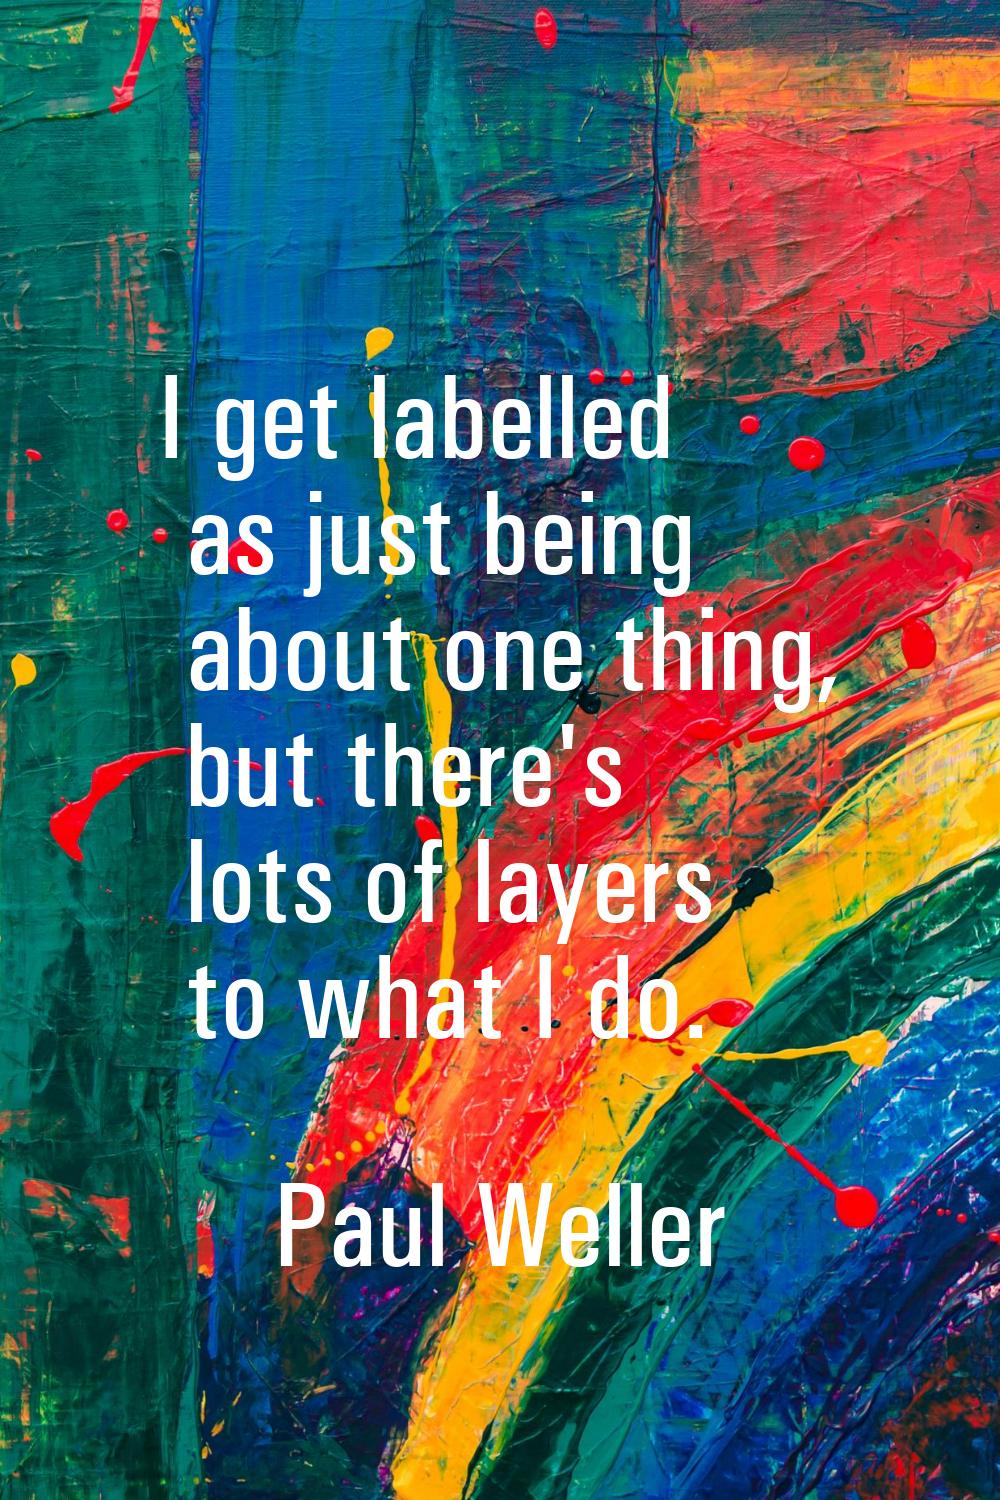 I get labelled as just being about one thing, but there's lots of layers to what I do.